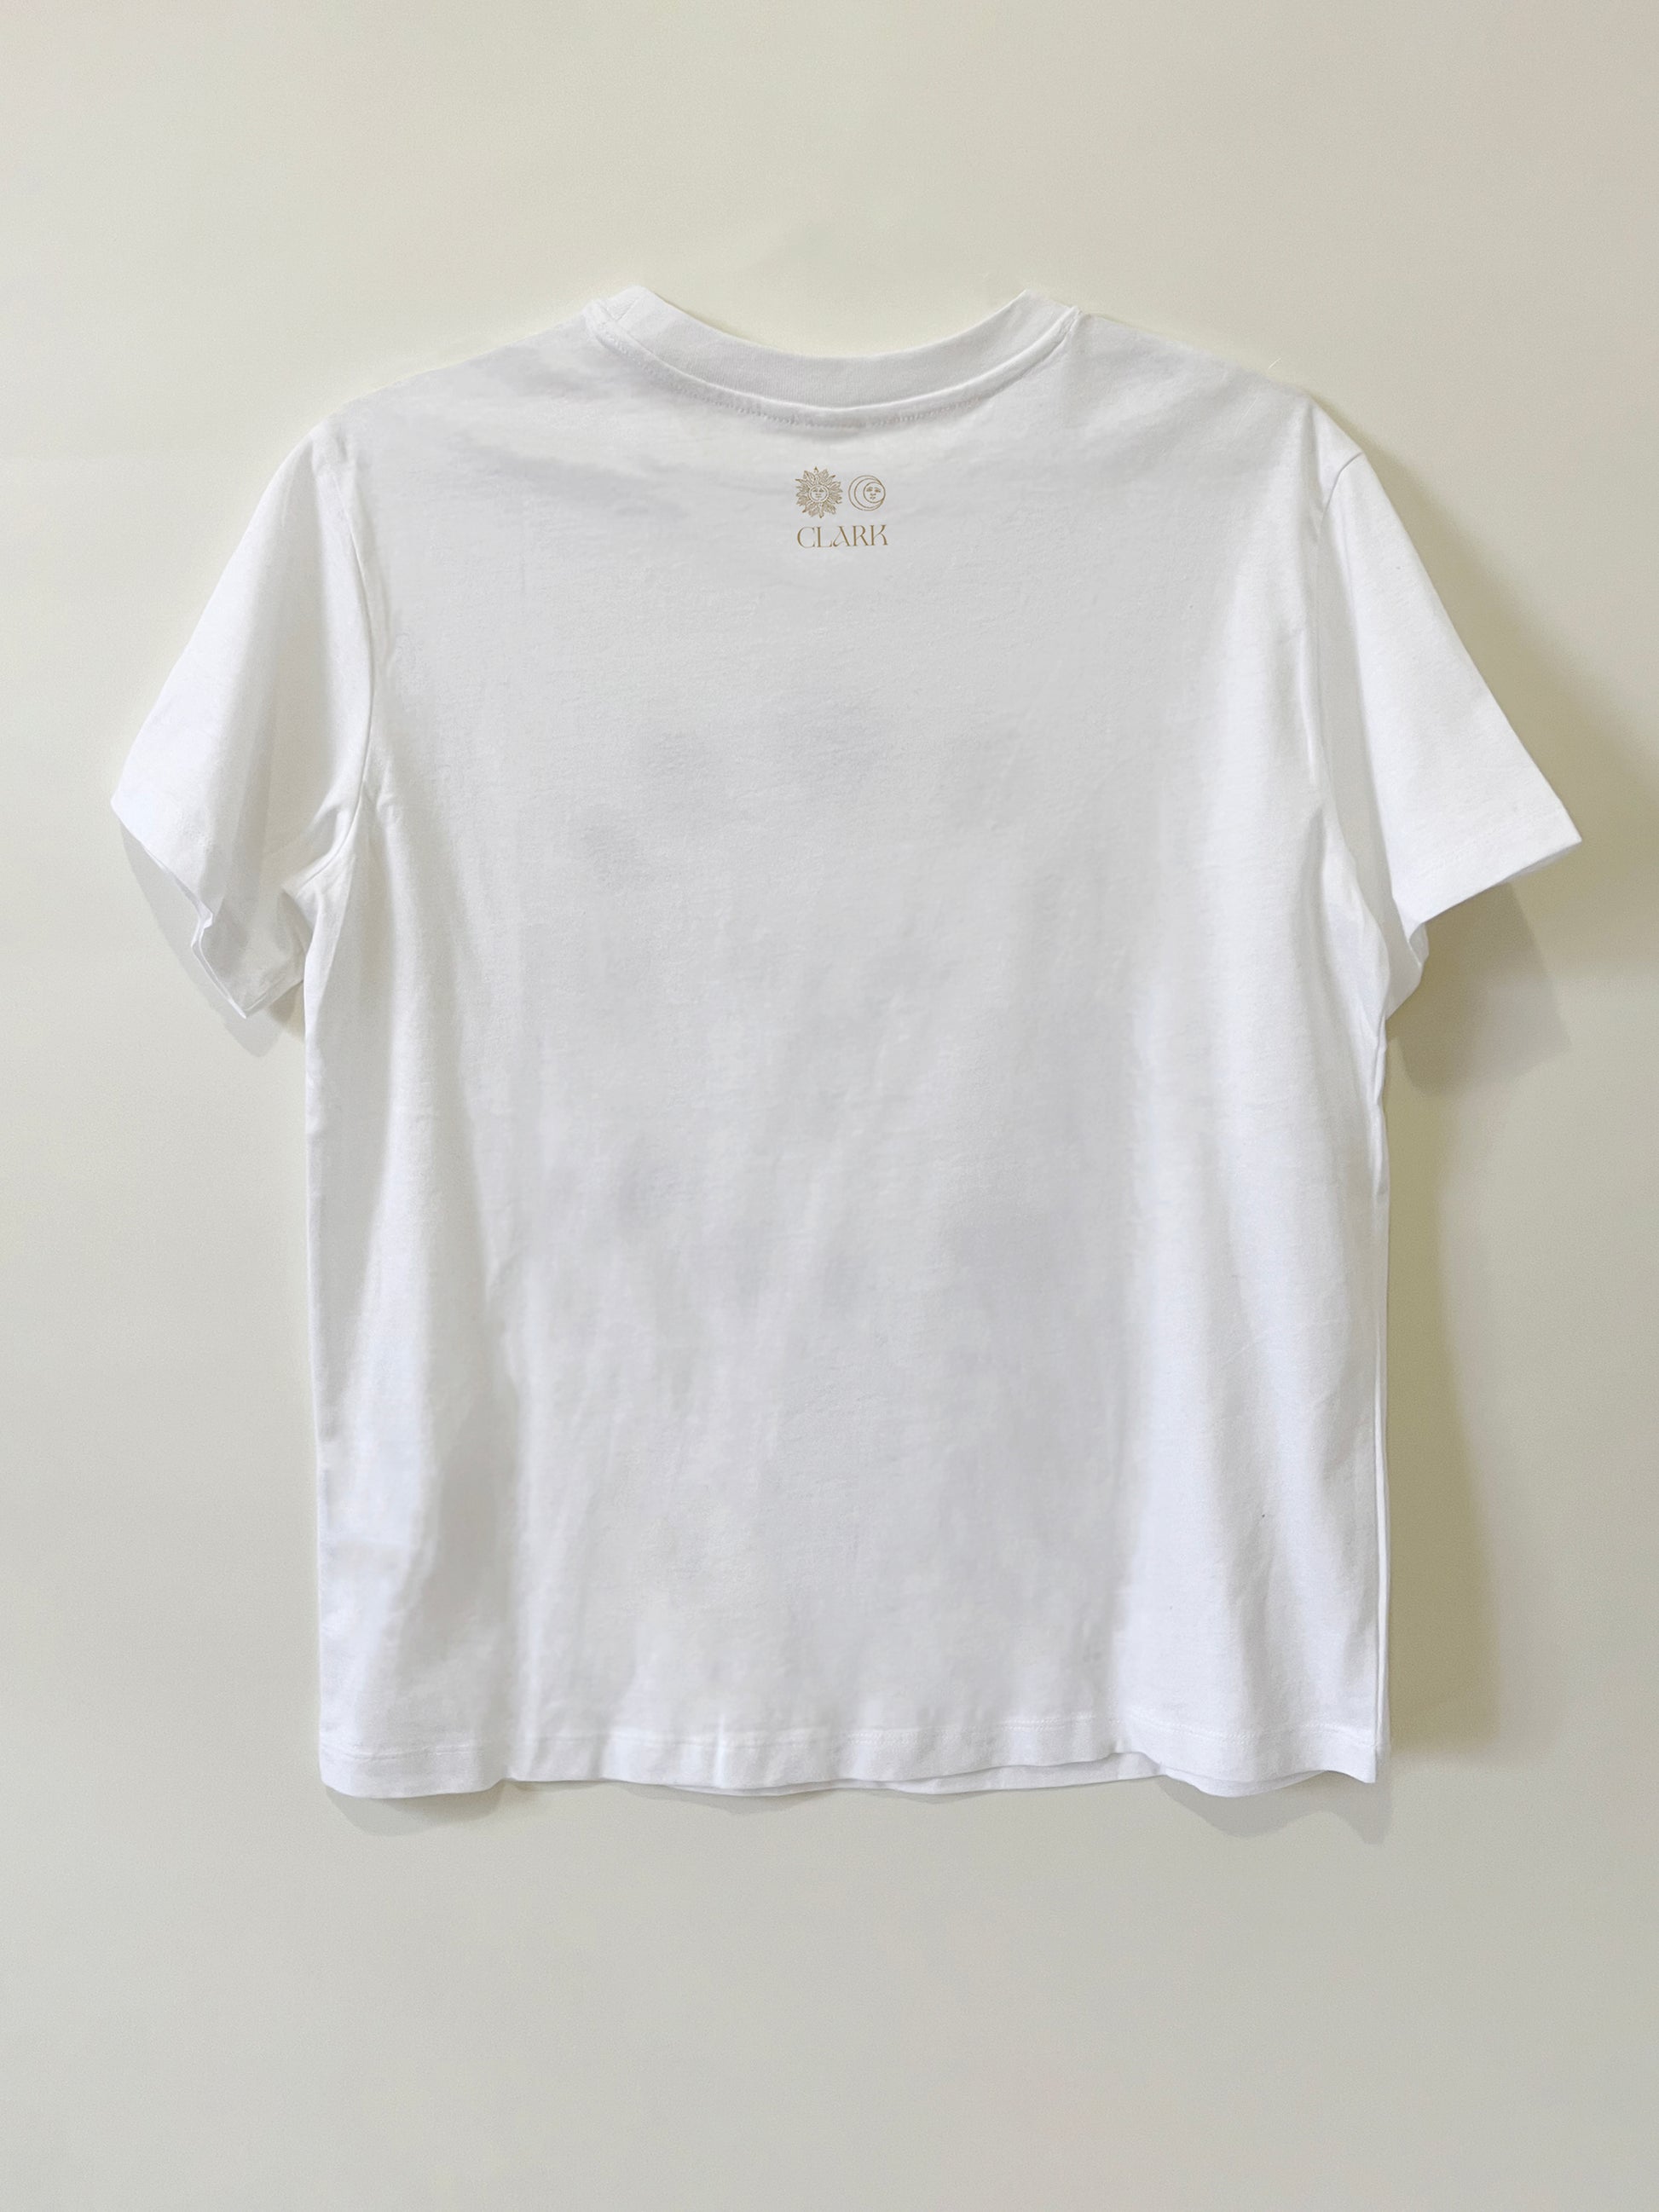 Product photo of Heartbreaker tee by CLARK. The back view of straight-cut white tee with CLARK logo printed in gold at the neck. Logo is of Sun and Moon with CLARK underneath. 